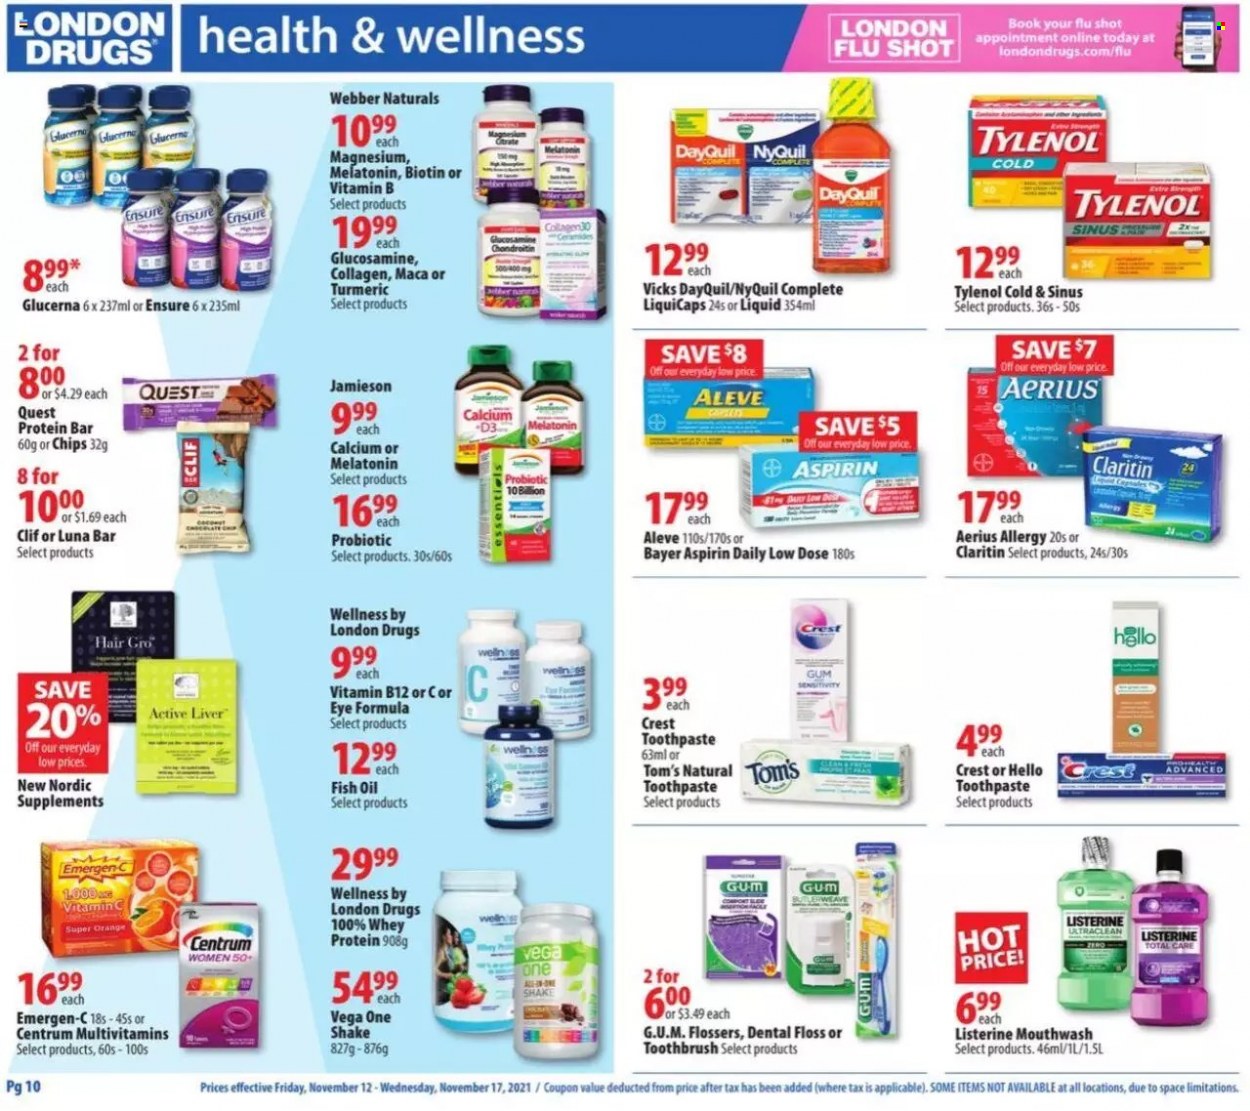 thumbnail - London Drugs Flyer - November 12, 2021 - November 17, 2021 - Sales products - protein bar, turmeric, oil, toothbrush, toothpaste, mouthwash, Crest, Vicks, book, Aleve, Biotin, DayQuil, fish oil, glucosamine, magnesium, Melatonin, multivitamin, Tylenol, vitamin c, NyQuil, Glucerna, Emergen-C, vitamin B12, whey protein, vitamin D3, Low Dose, aspirin, Centrum, Bayer, Listerine, chips. Page 10.